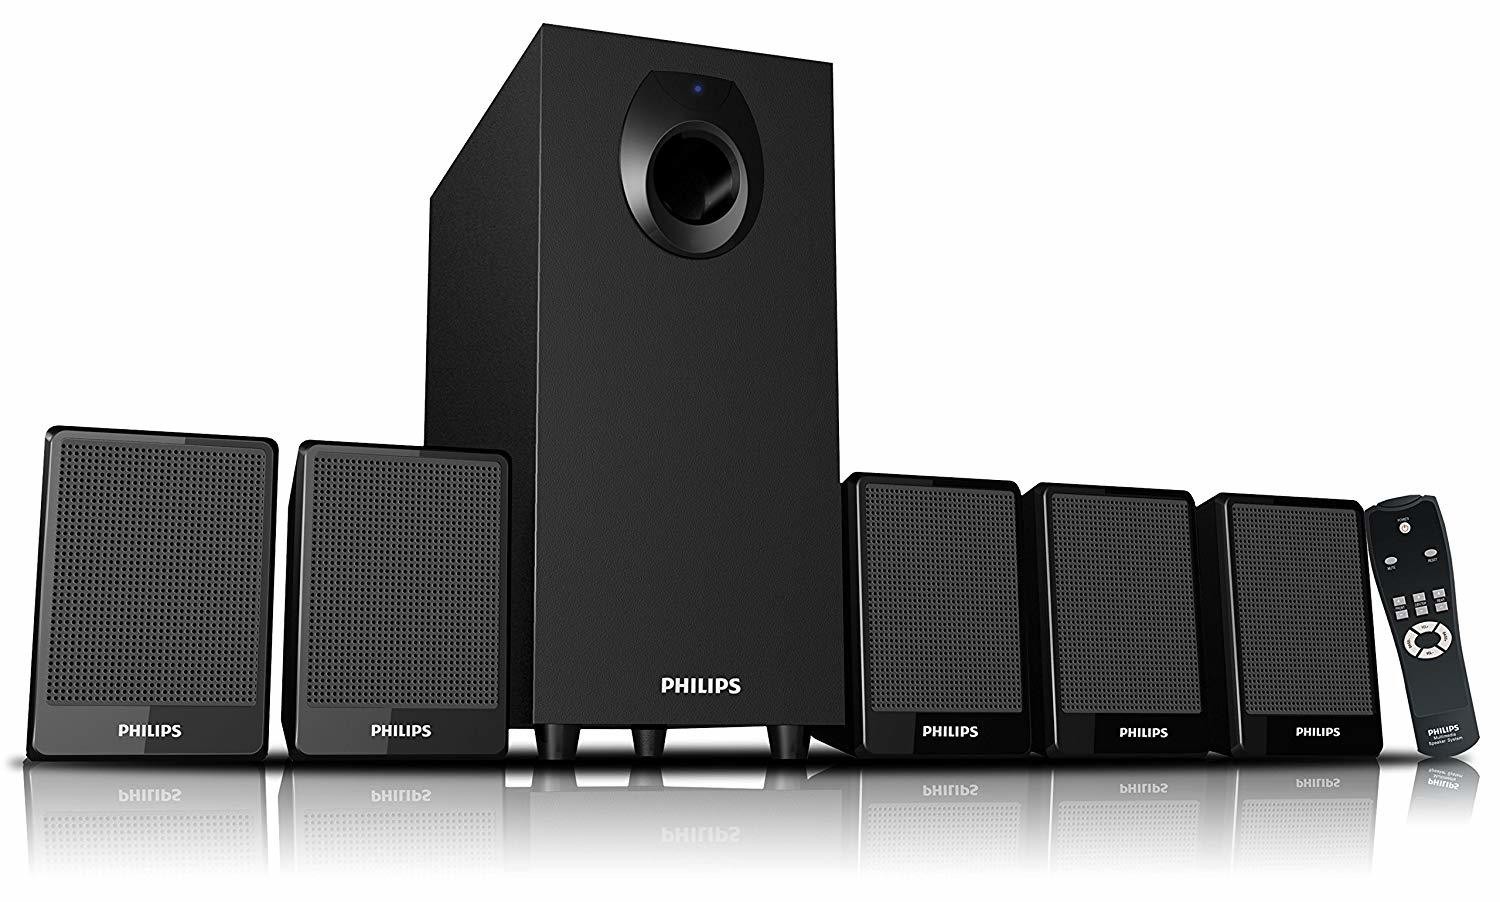 Philips DSP 2800 5.1 Speaker System , without